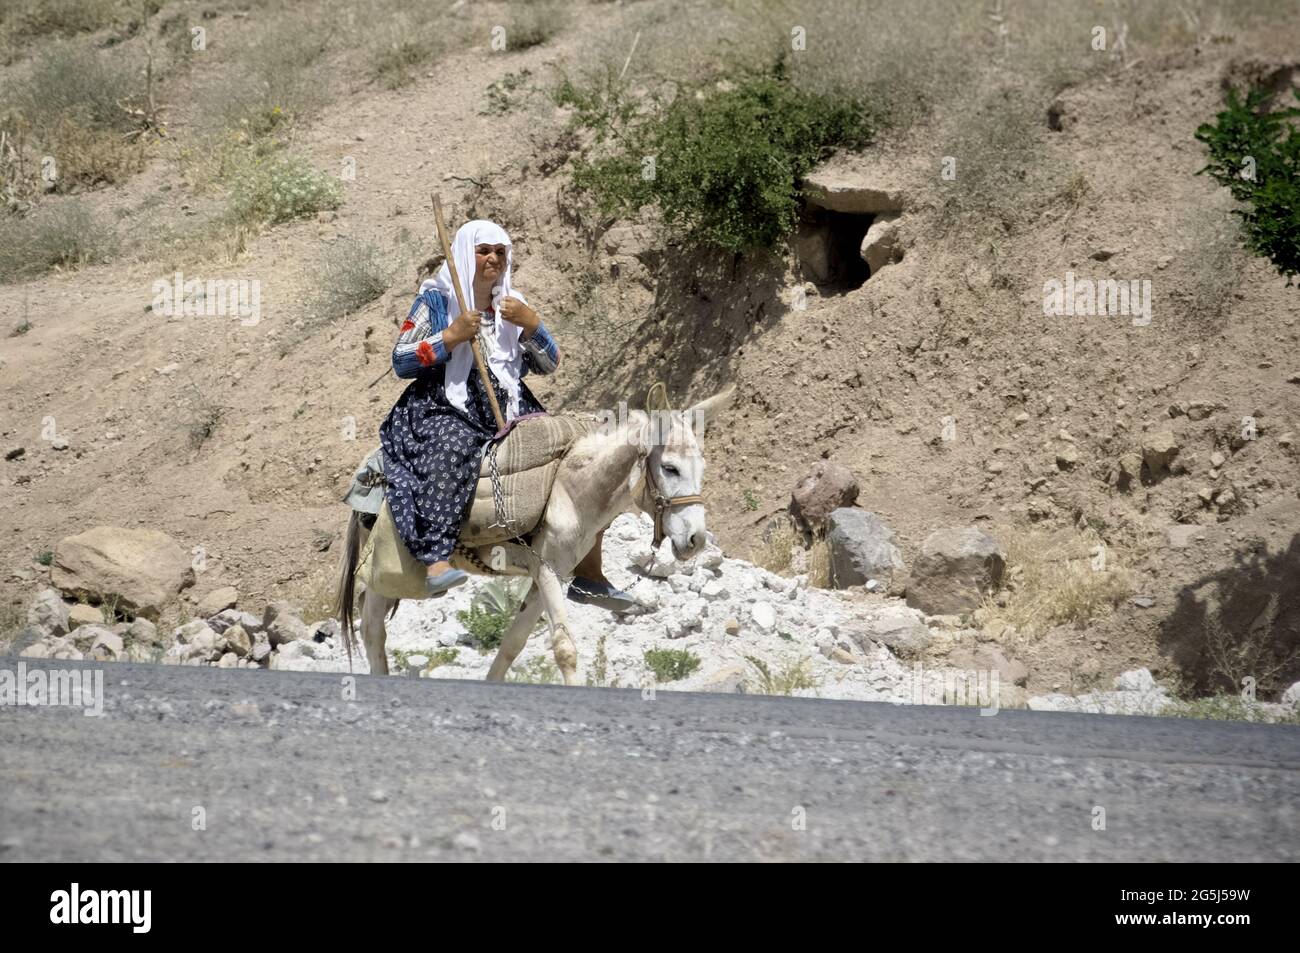 culture of turkey woman on a donkey in old traditional dress and headscarf Stock Photo